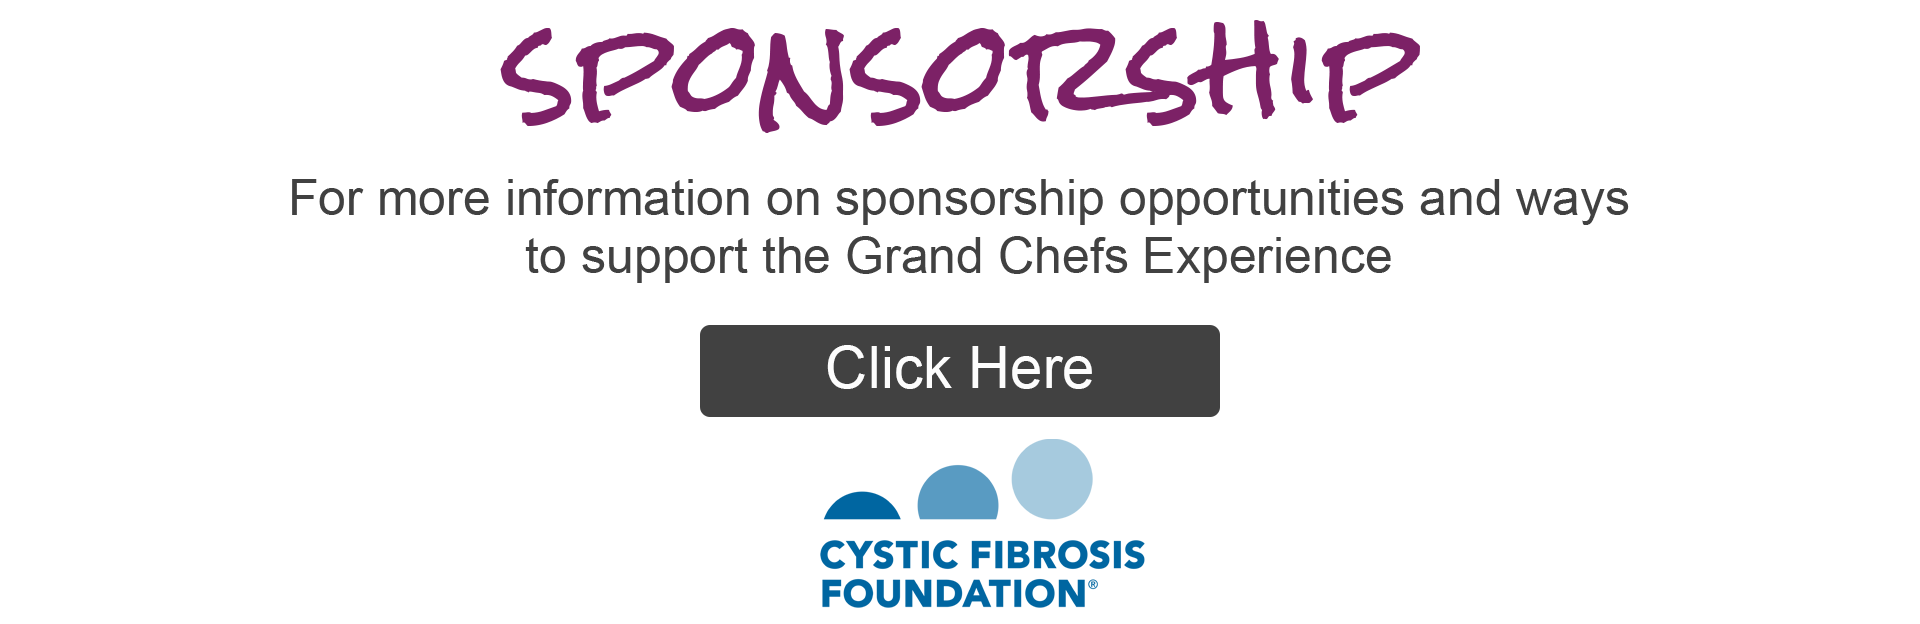 Sponsorship Opportunities Click Here